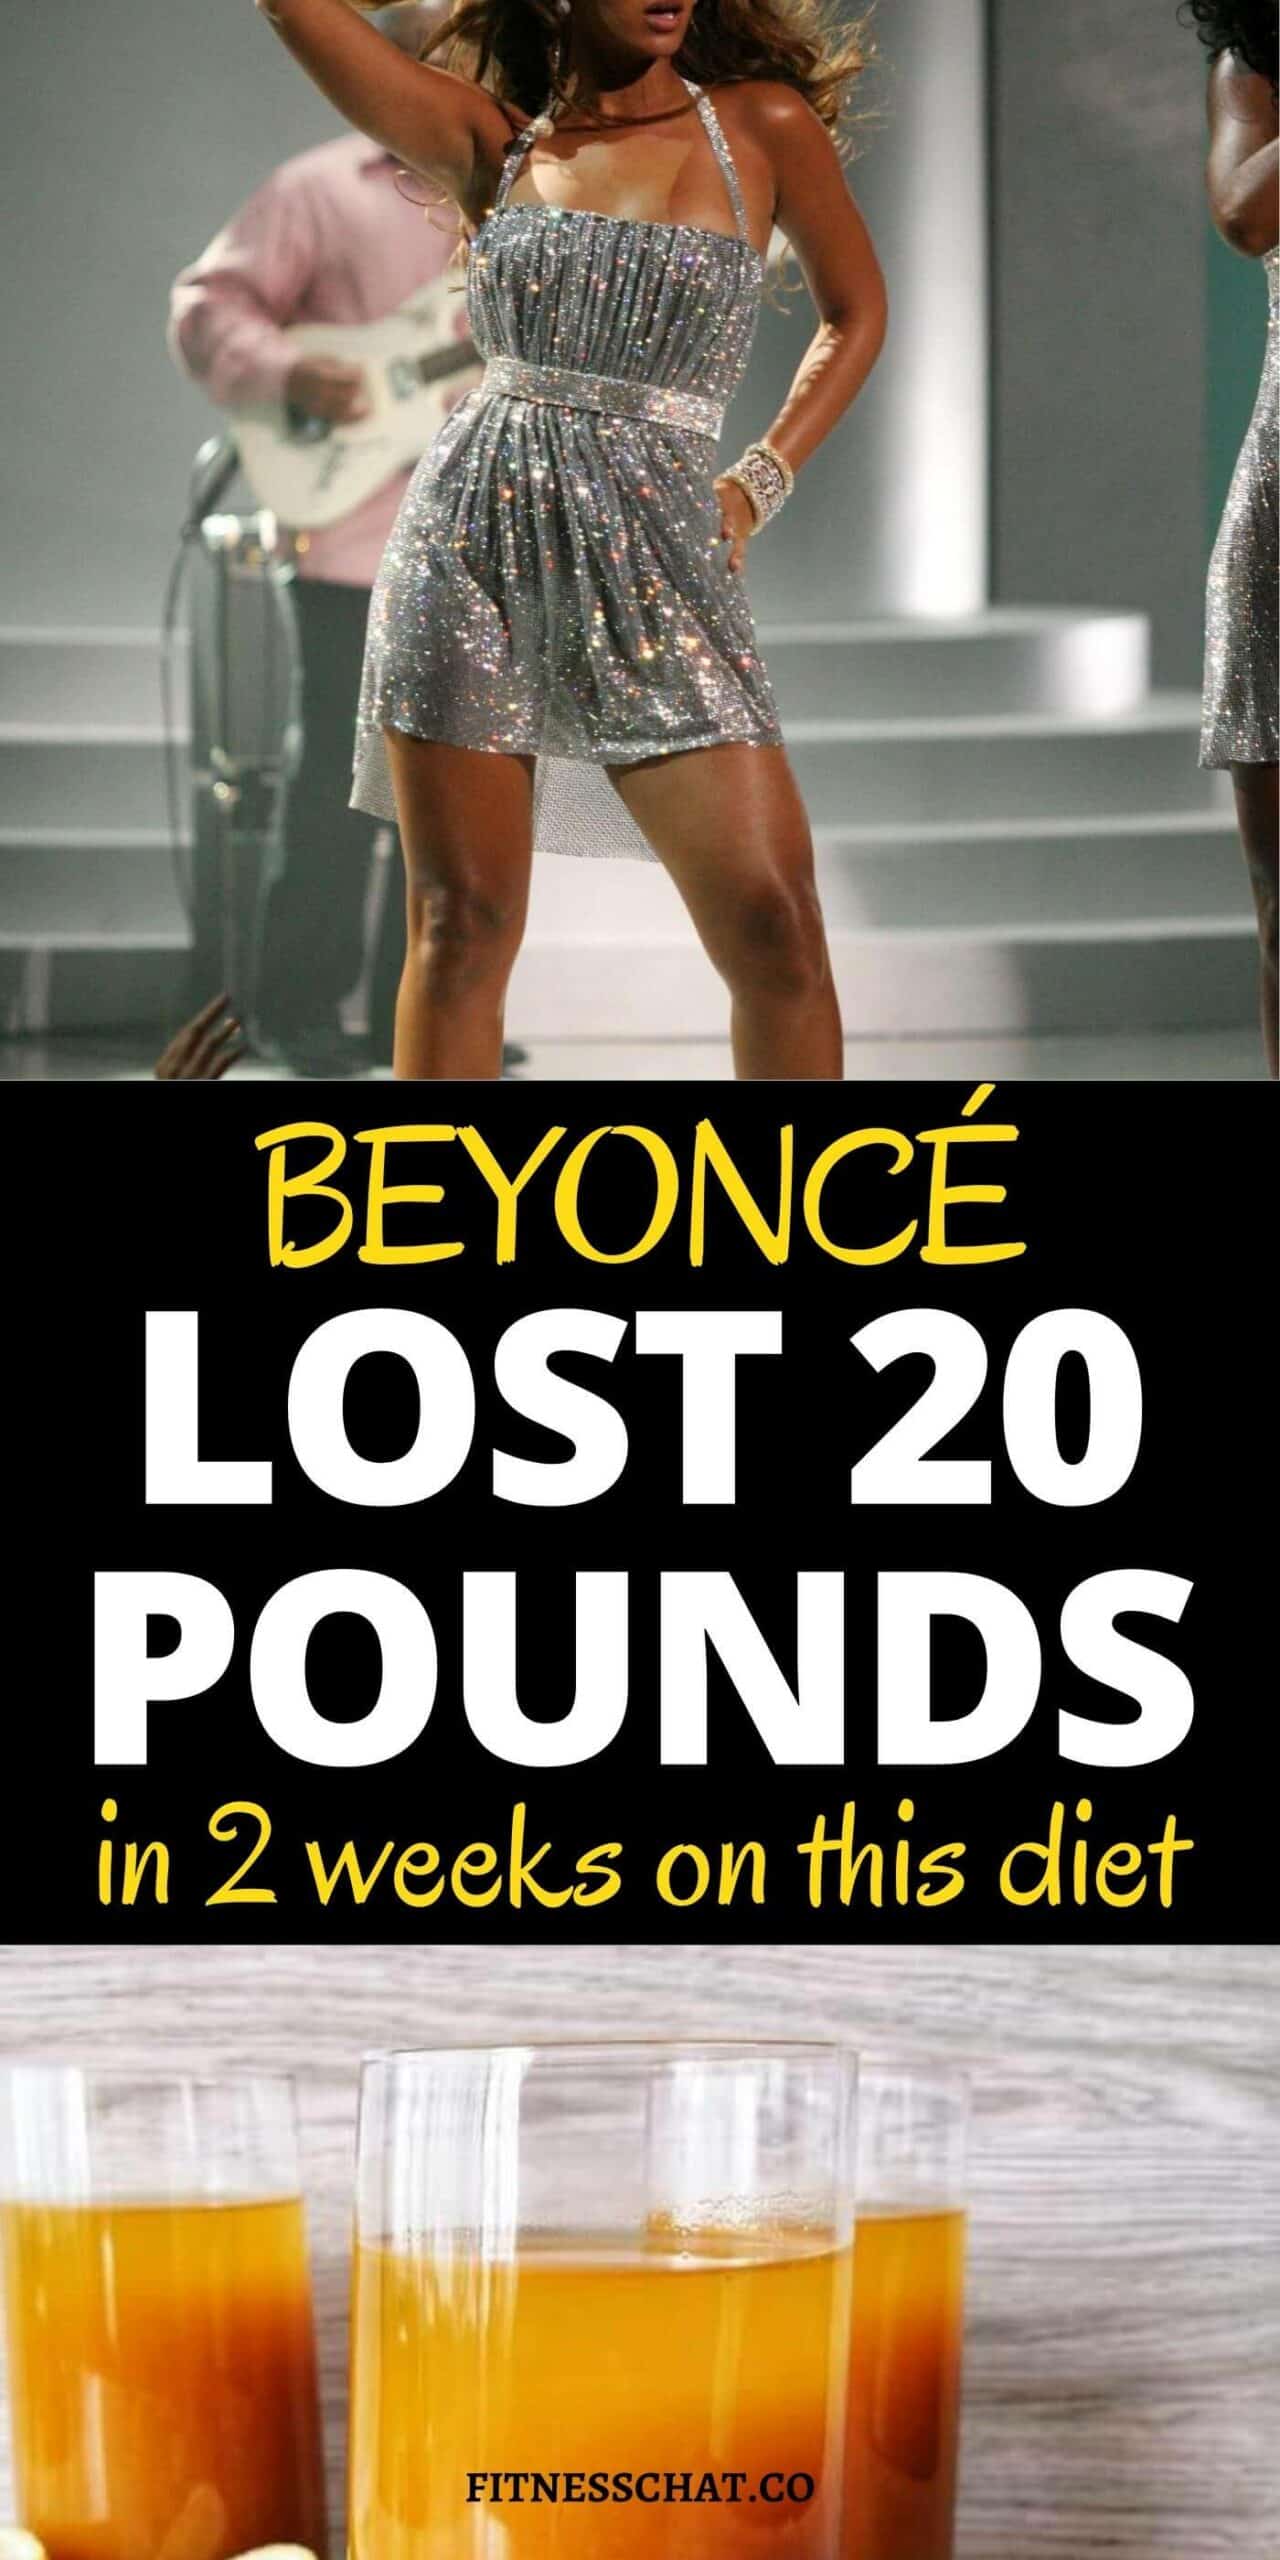 lemonade diet before and after